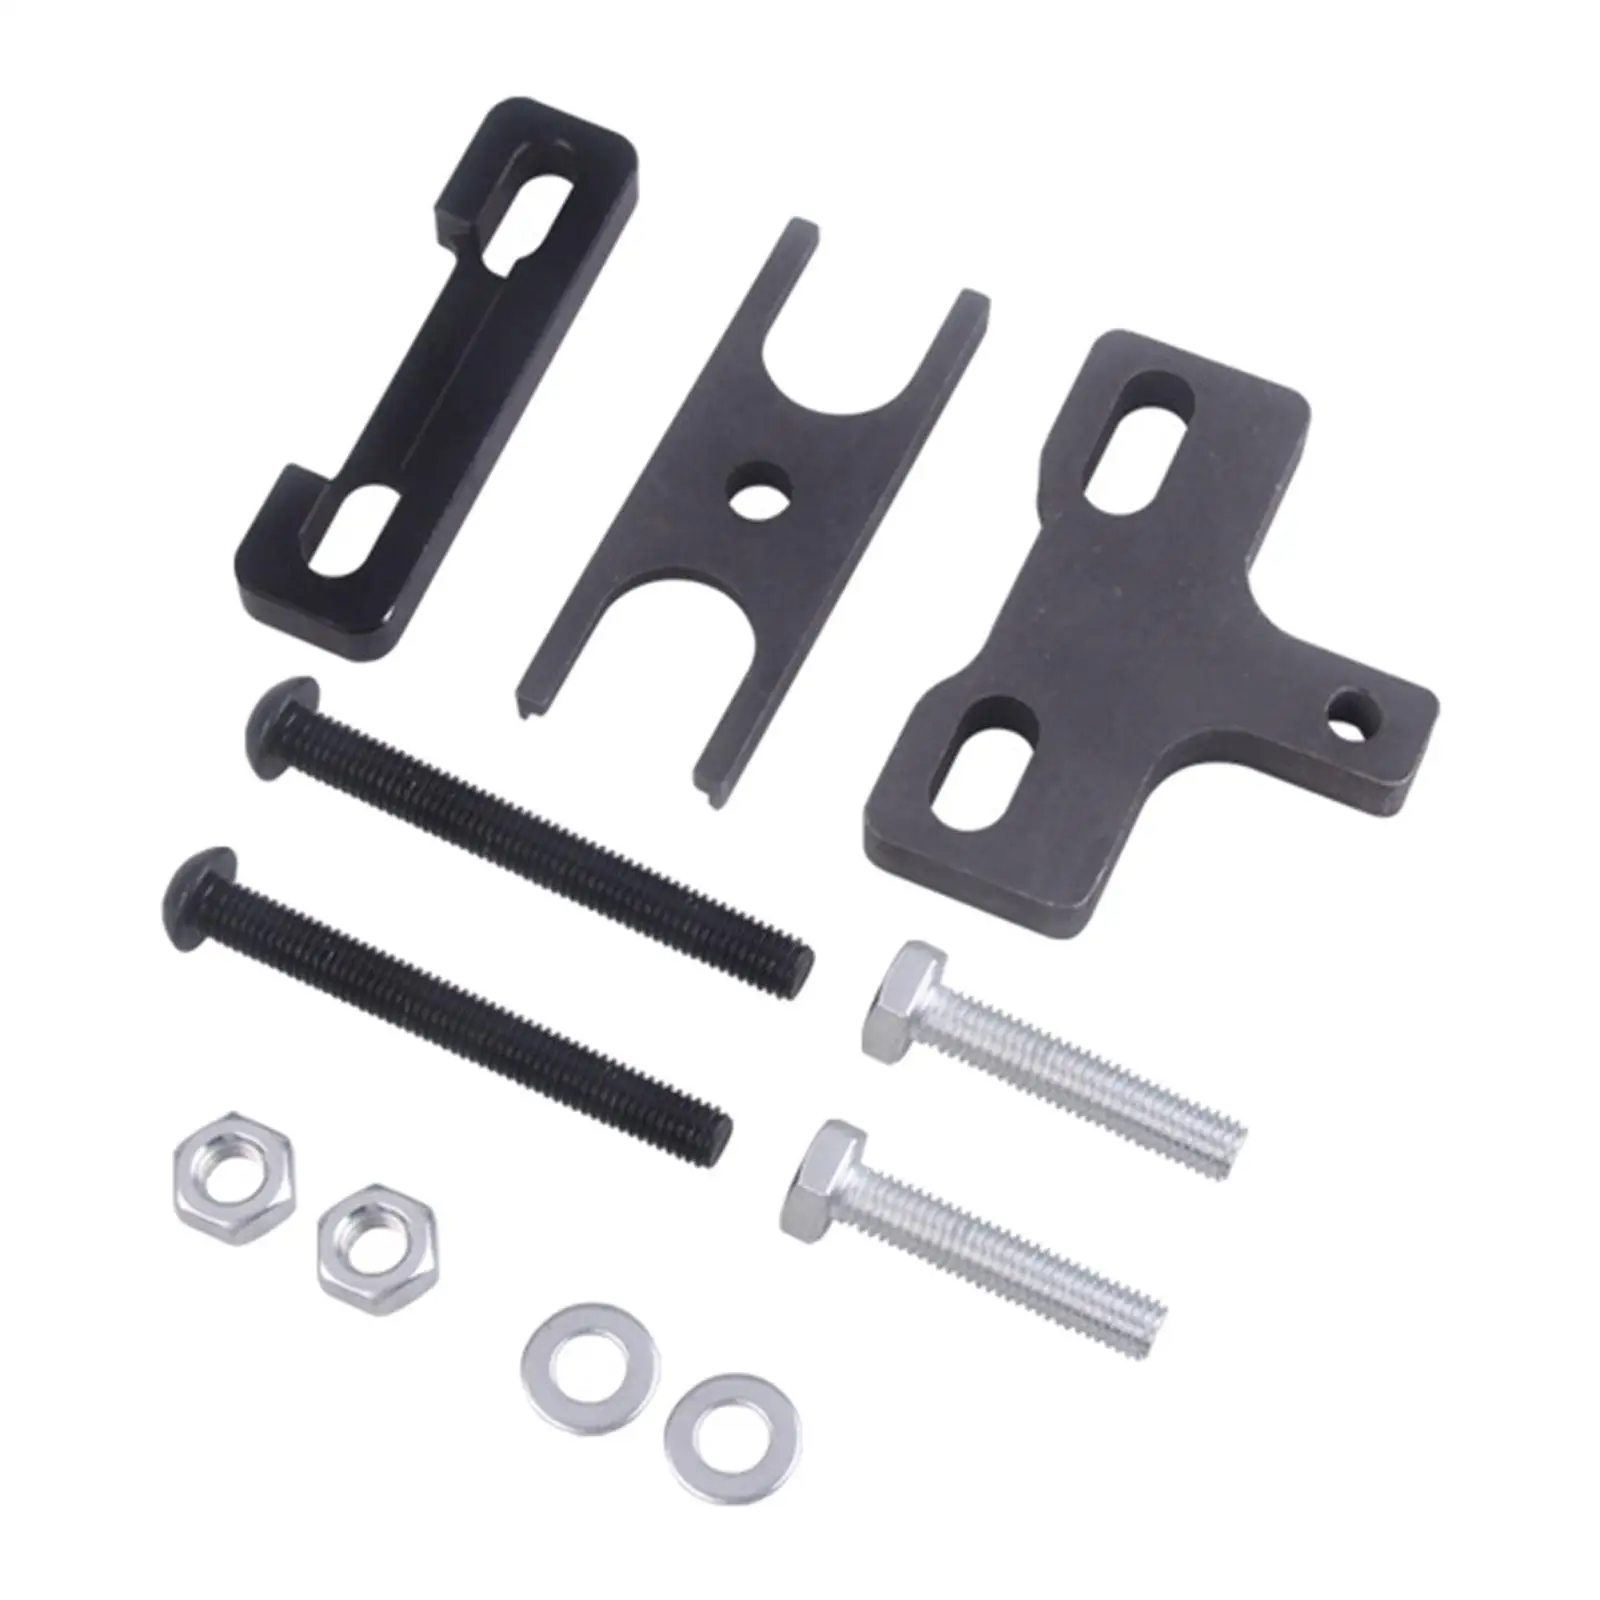 

Spring Compressor Tool Accessory Easy to Install Supplies LS Series Spring Removal Tool Replace Engine Parts for LS 5.3 5.7